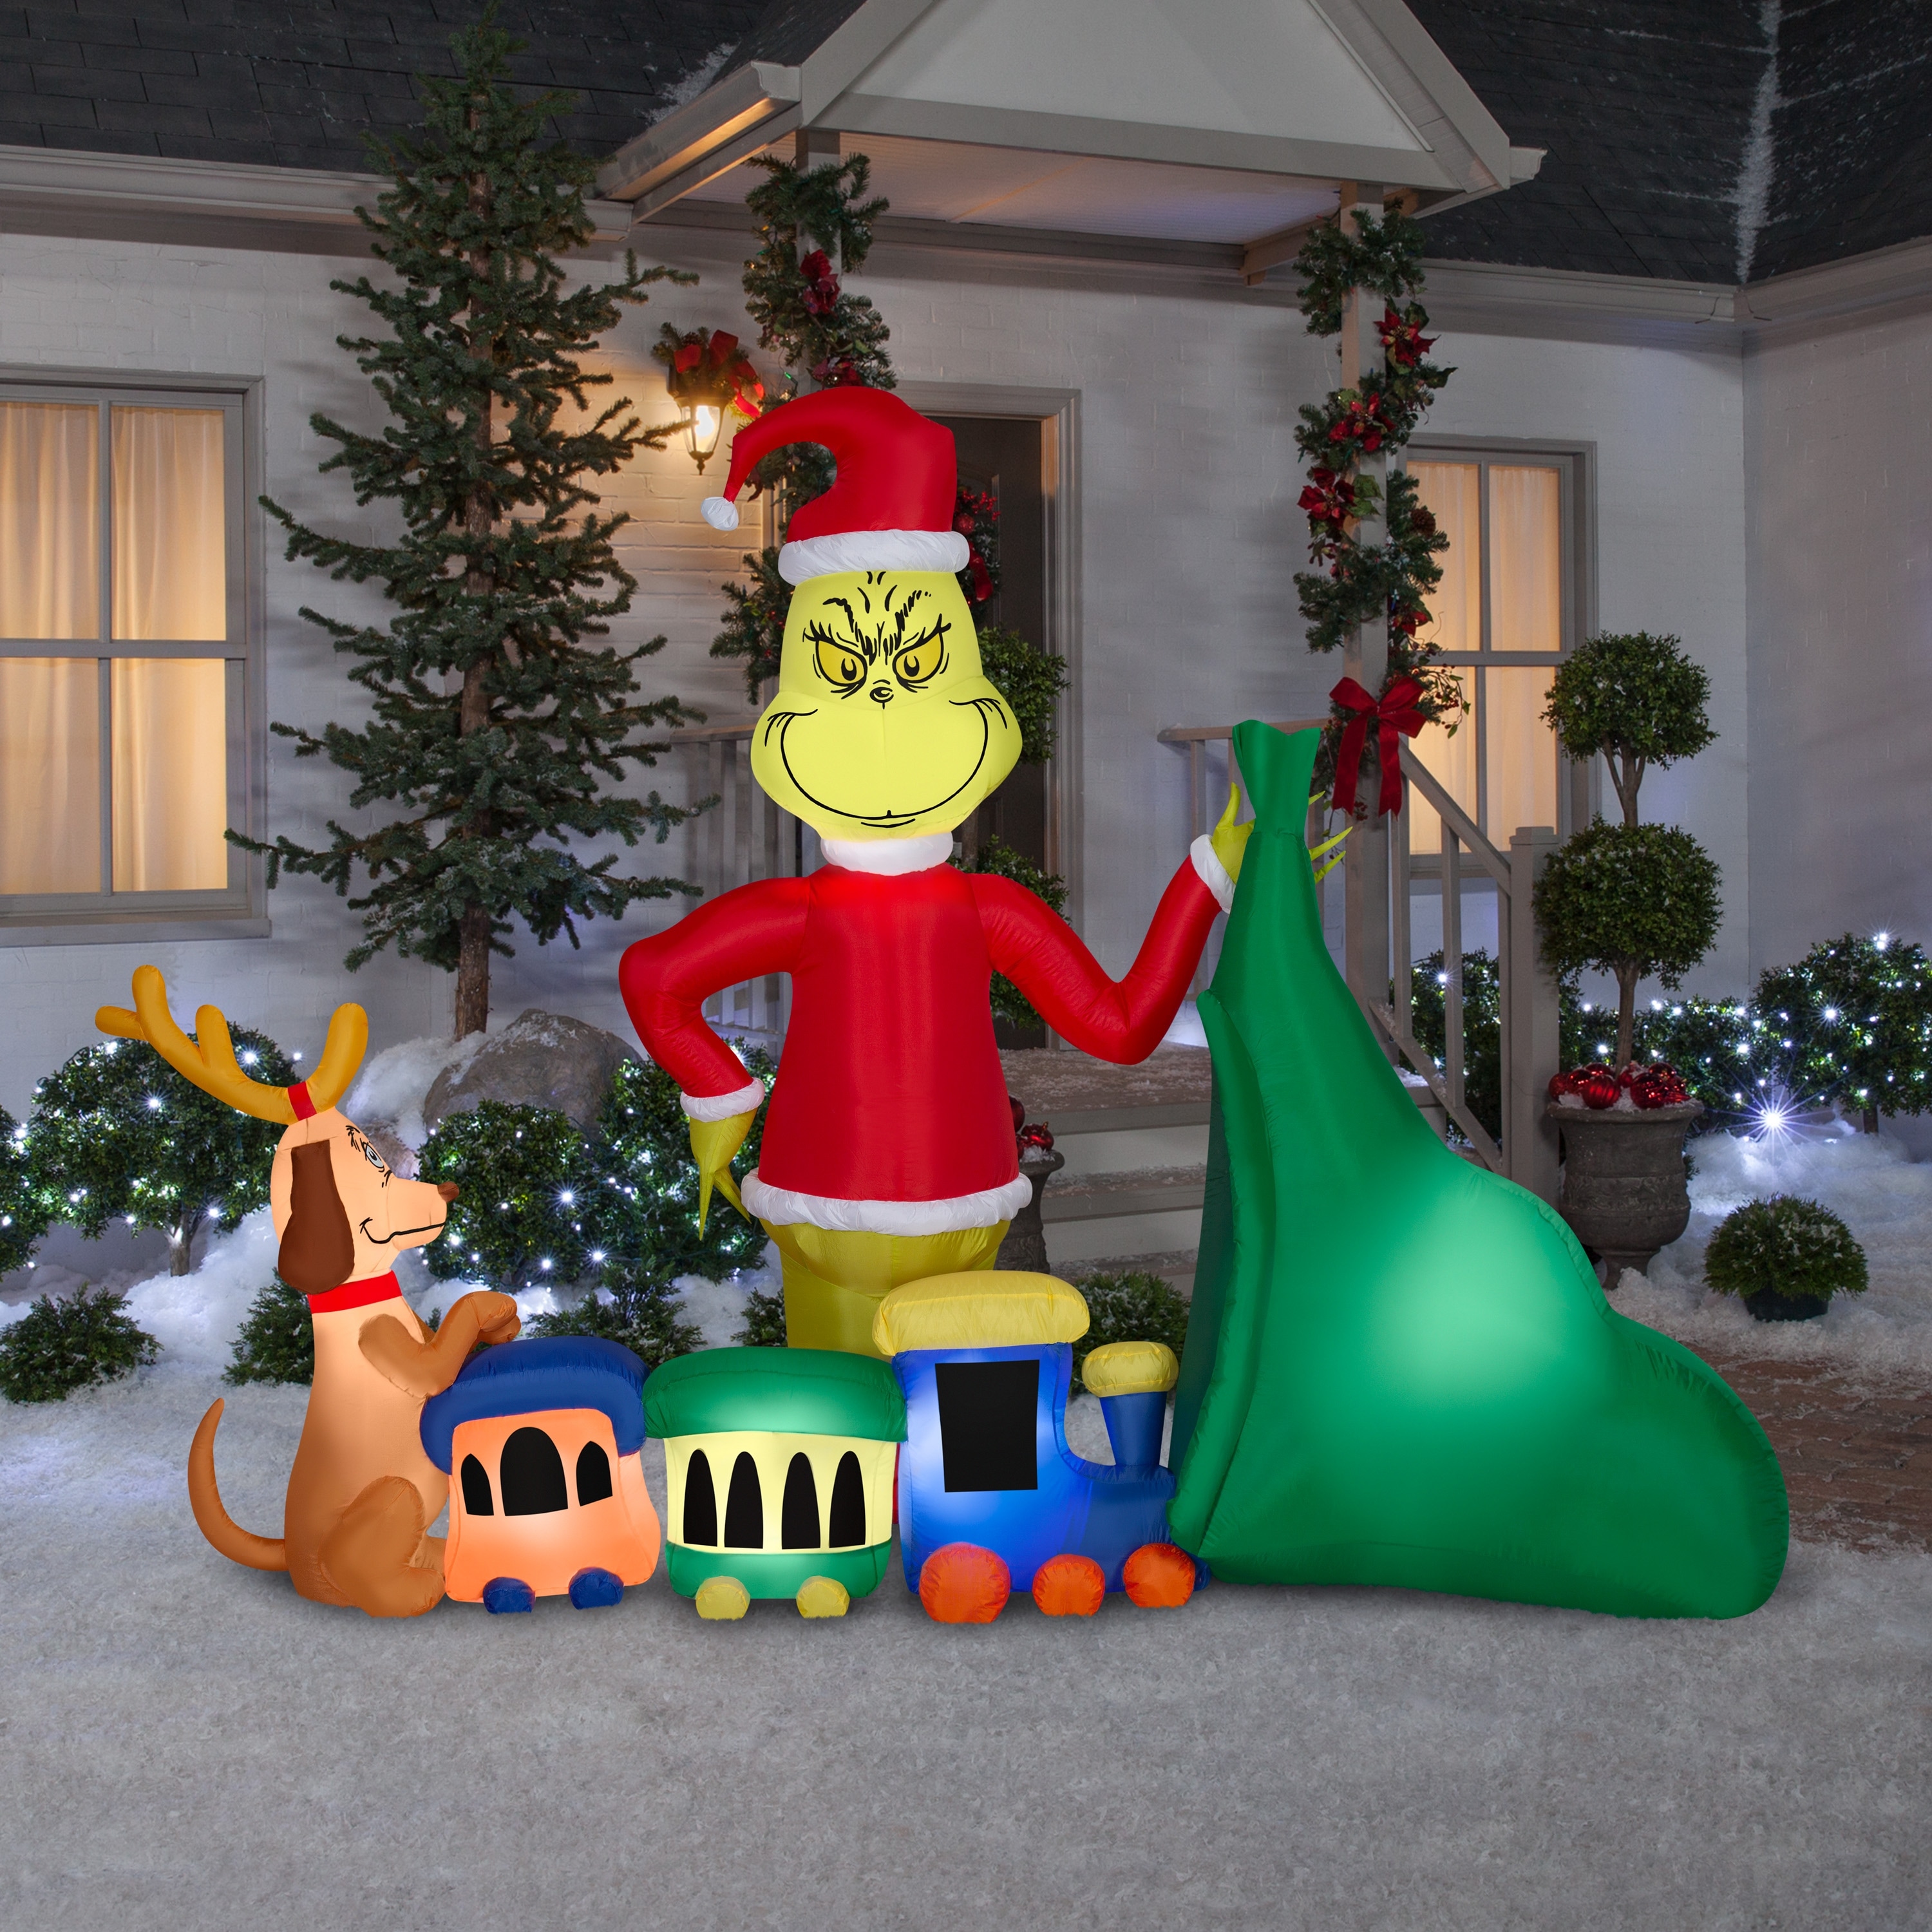 https://ak1.ostkcdn.com/images/products/is/images/direct/d6ba924b865afafe78424cf377850377357a846d/Gemmy-Christmas-Airblown-Inflatable-Grinch-Putting-Train-in-Santa-Sack-Scene-Dr.-Seuss%2C-6.5-ft-Tall.jpg